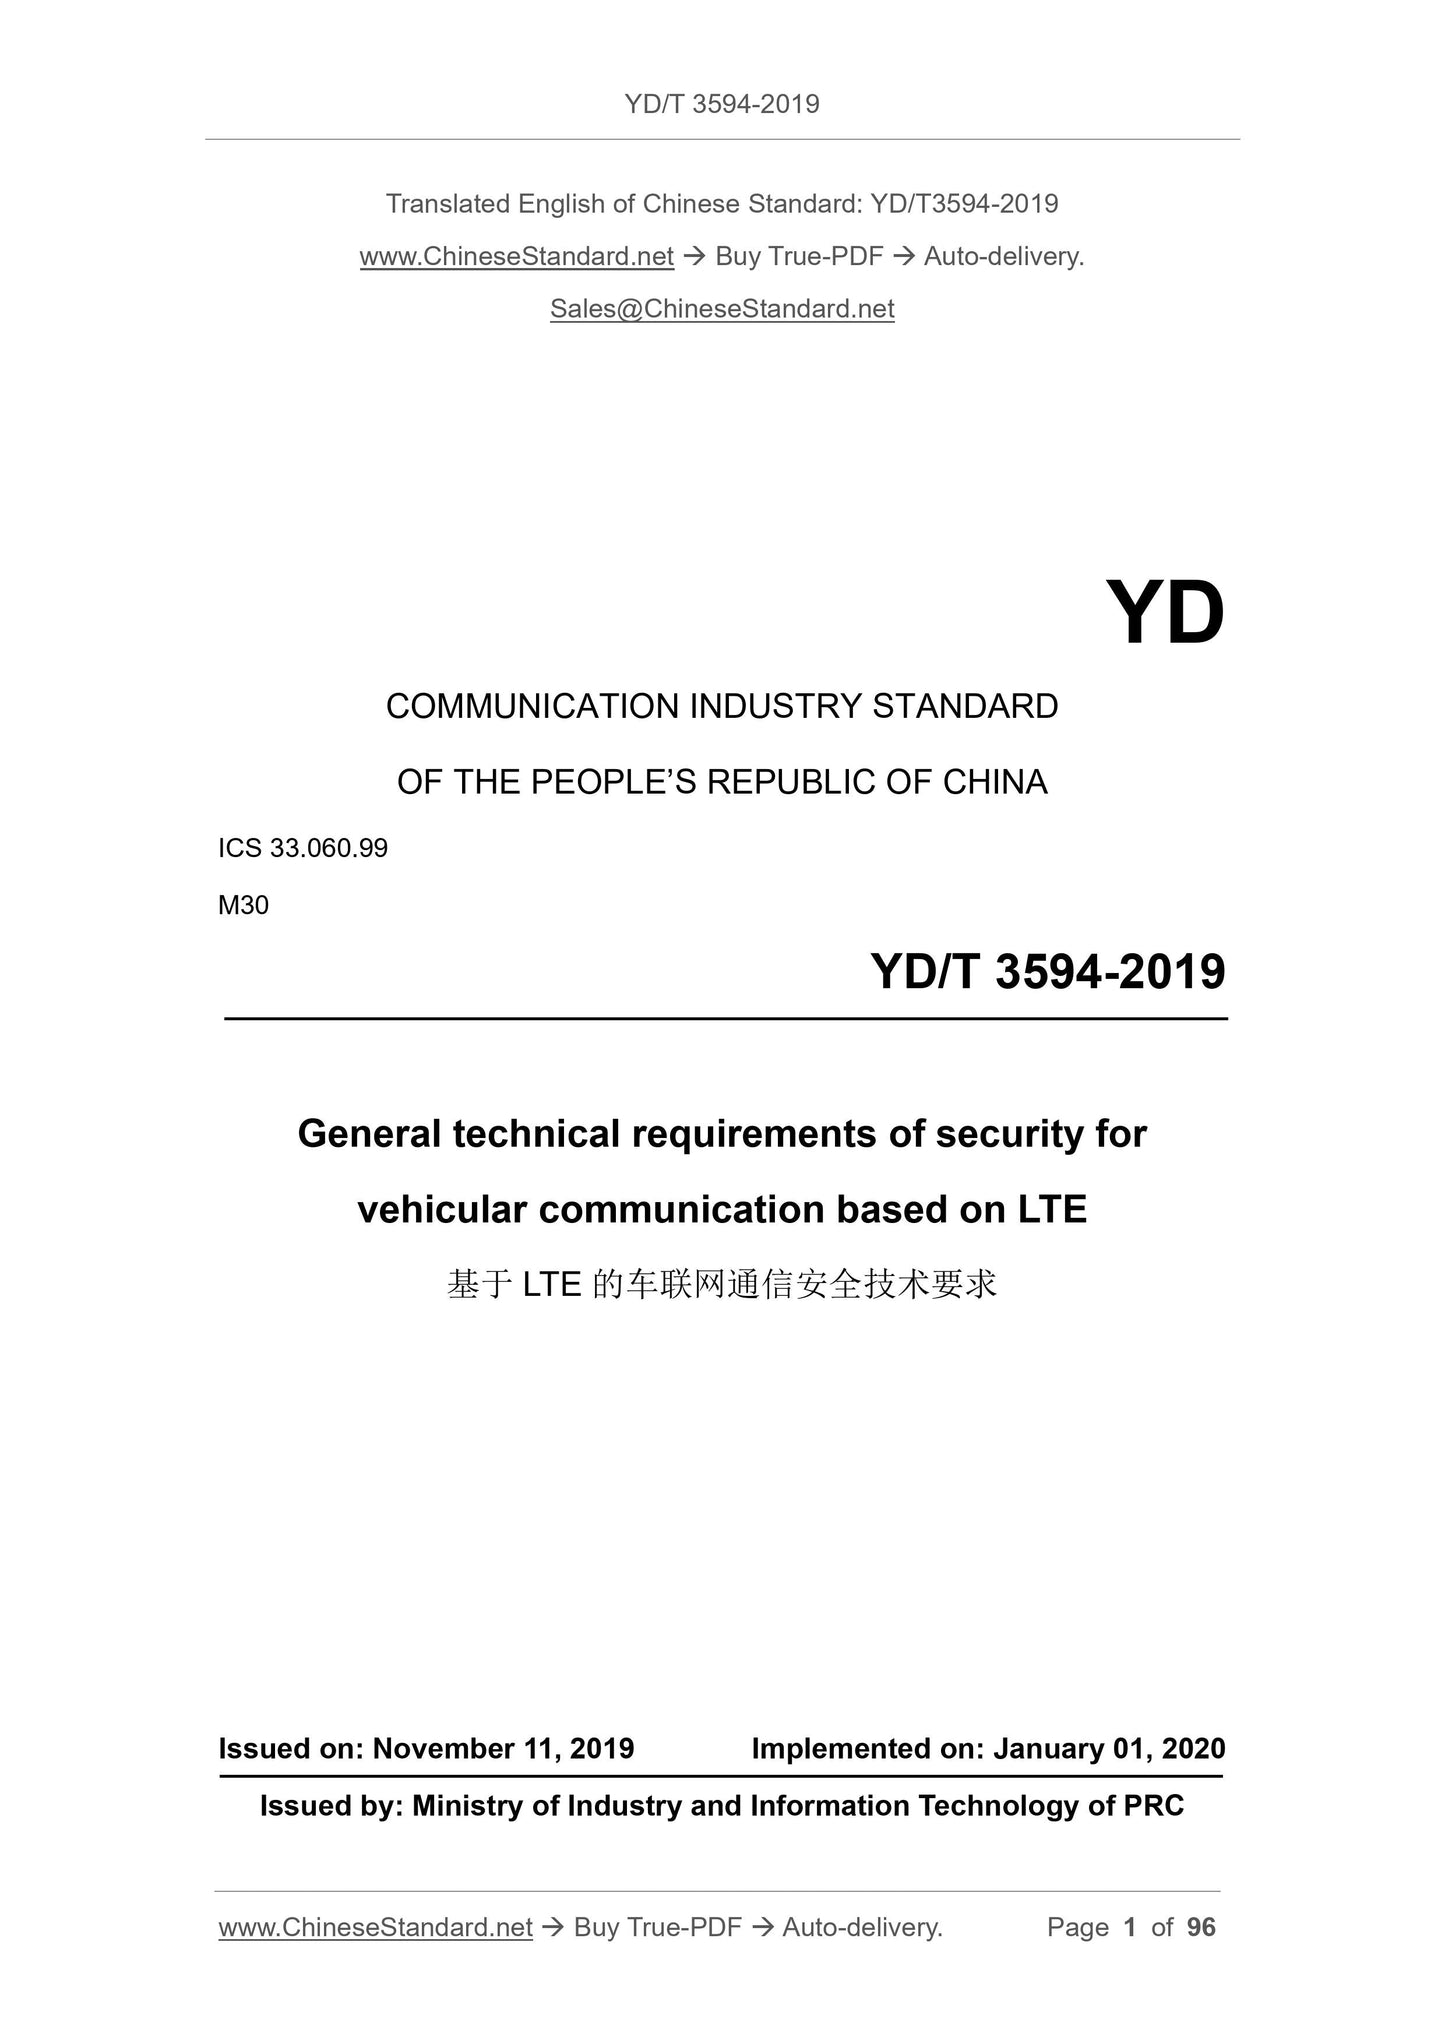 YD/T 3594-2019 Page 1